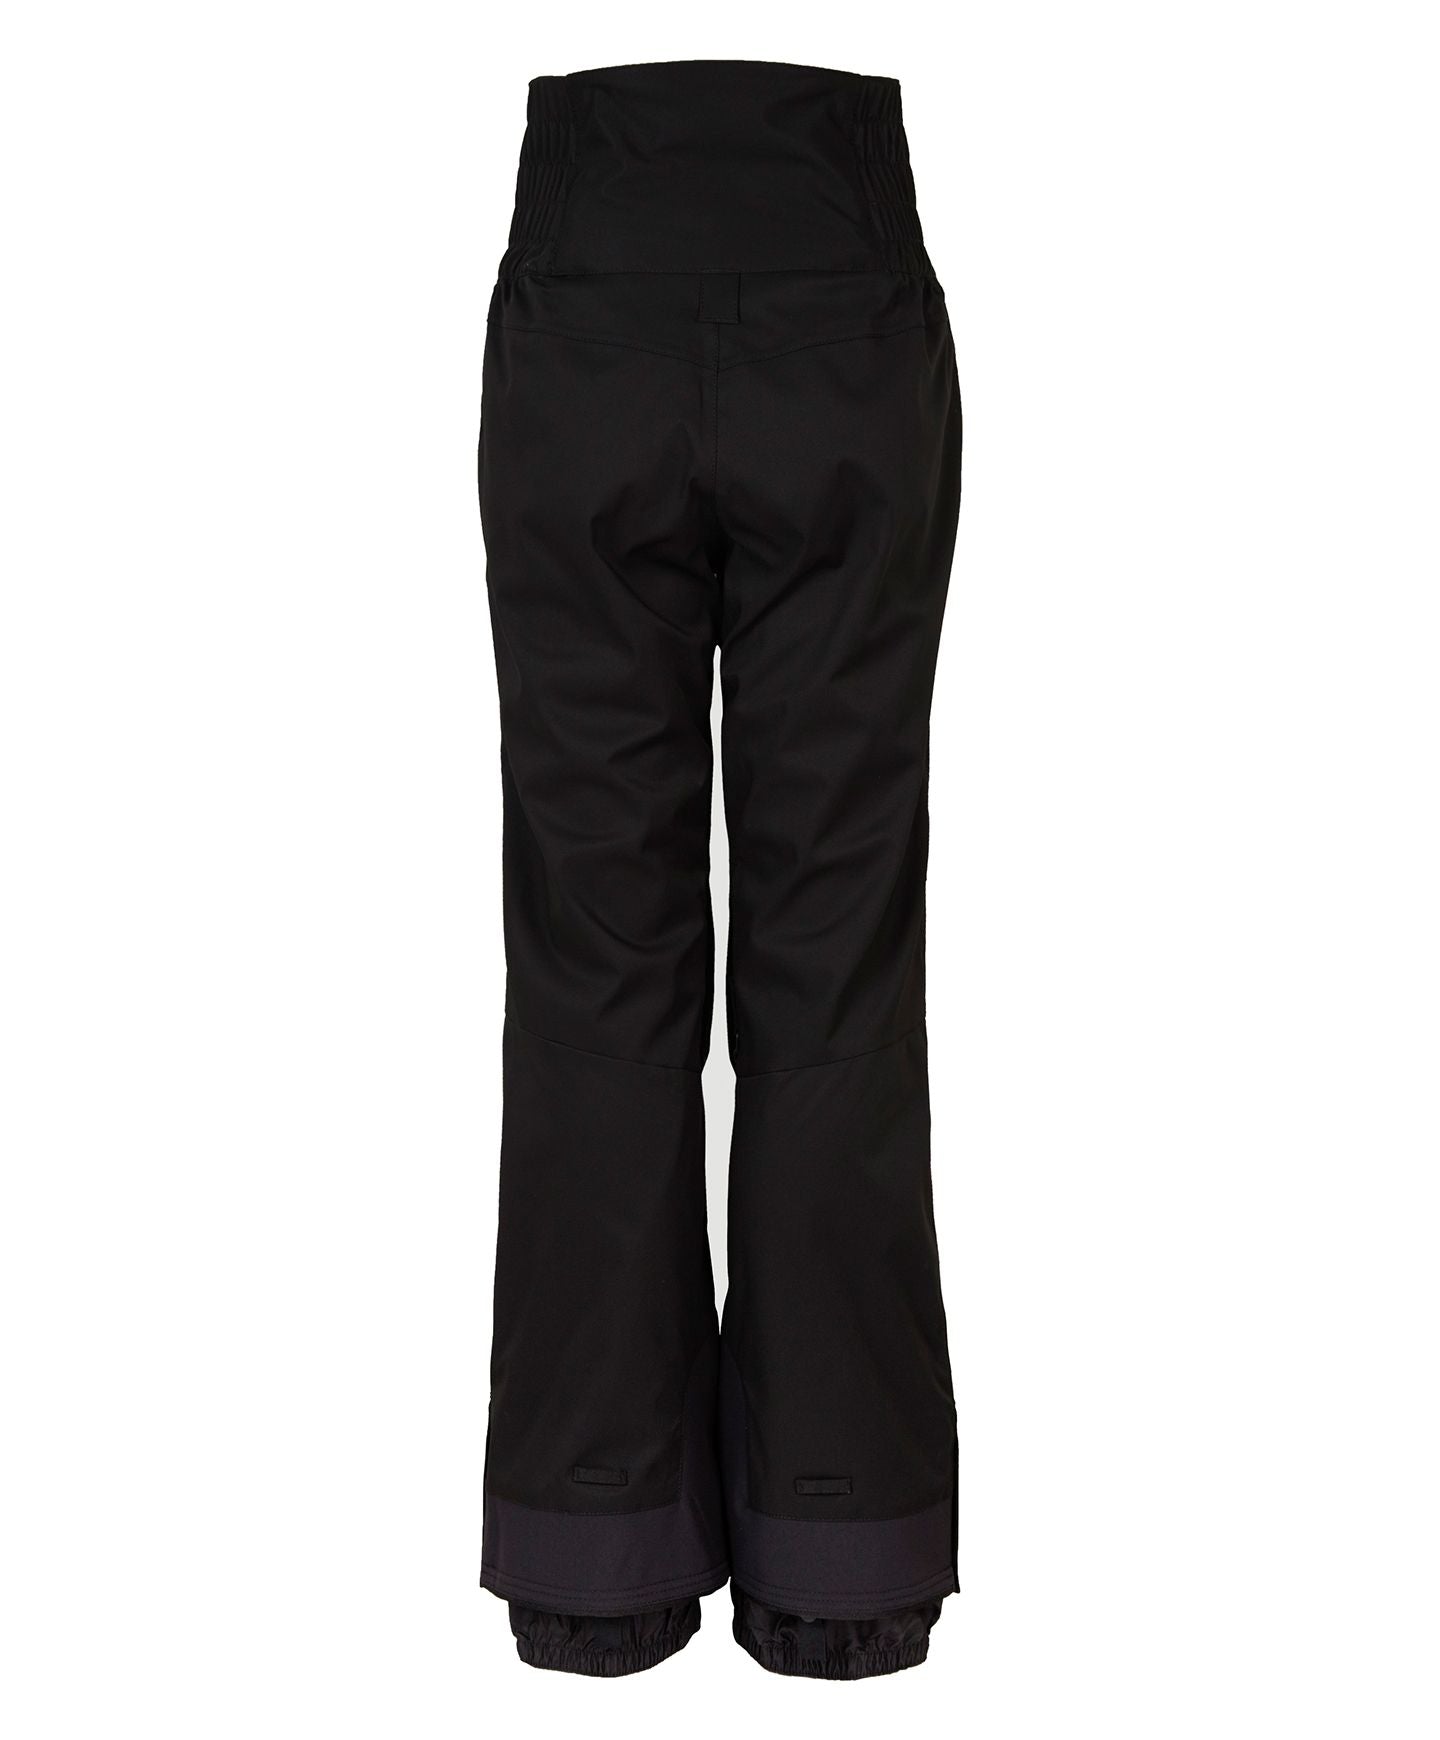 Buy Womens Armetrine Snow Pants - Black Out by ONeill online